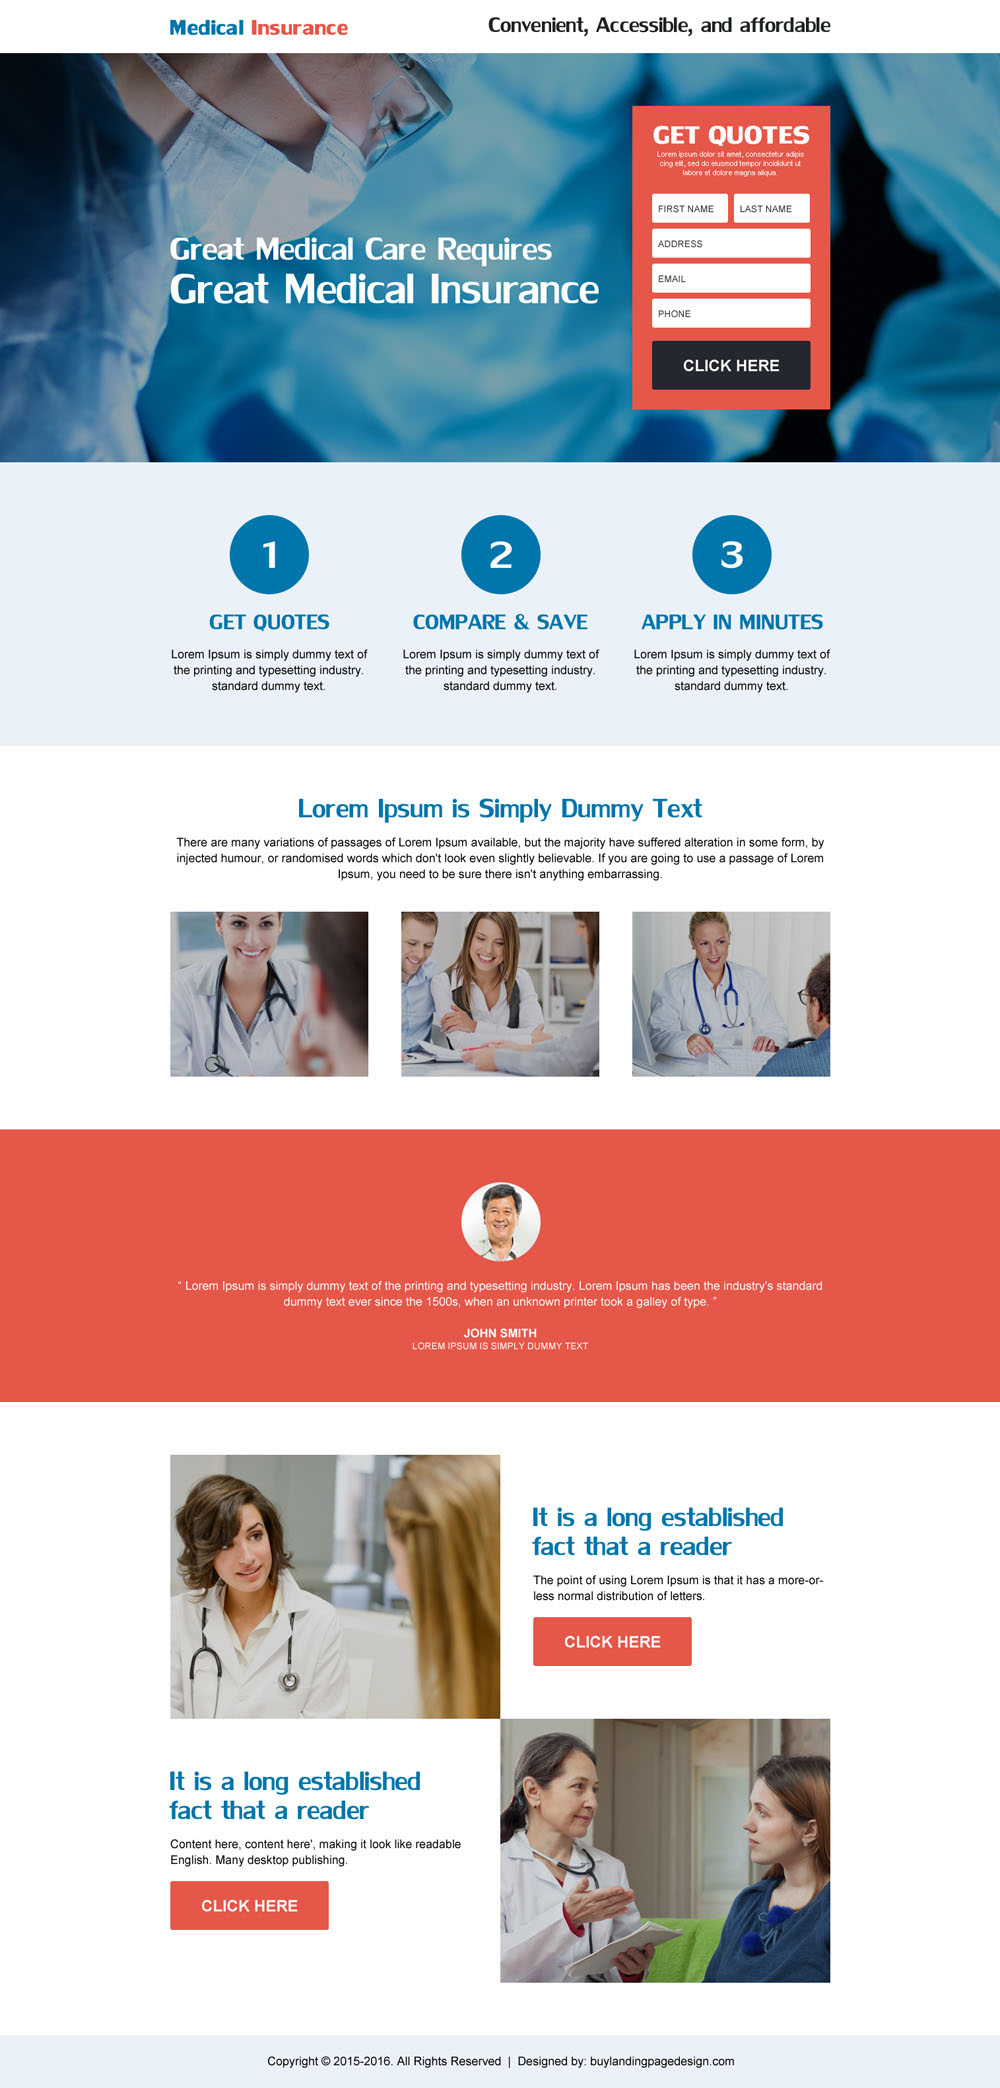 great-medical-care-insurance-free-quote-lead-capture-landing-page-design-004